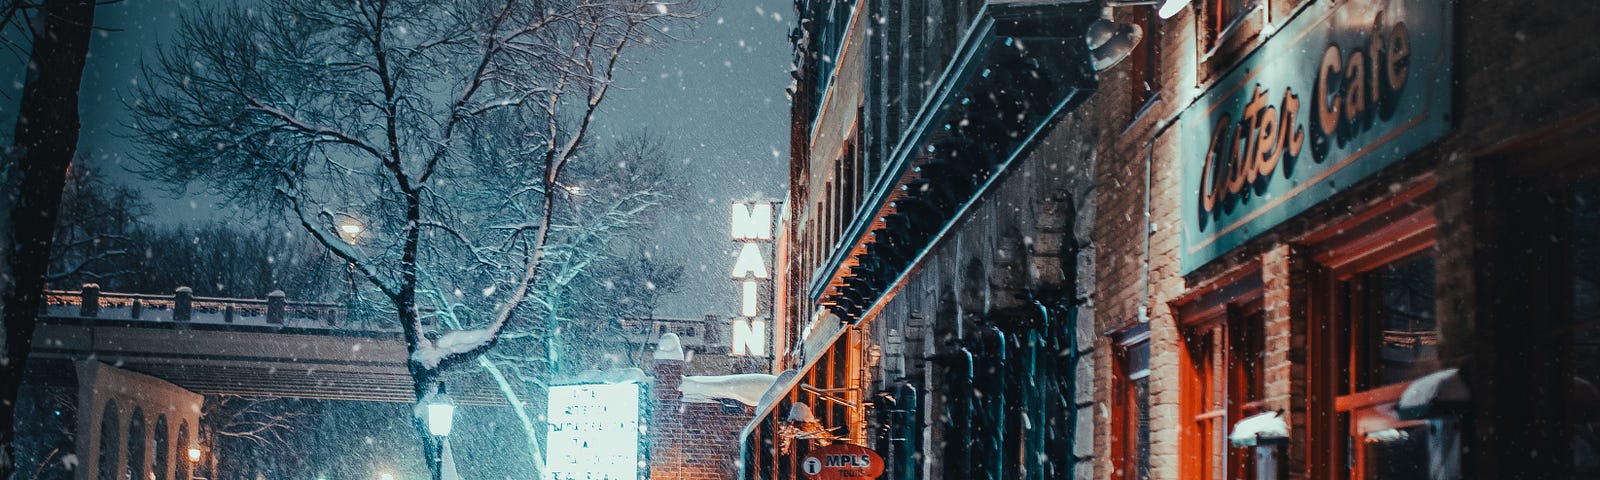 wintery sidewalk in front of a cafe